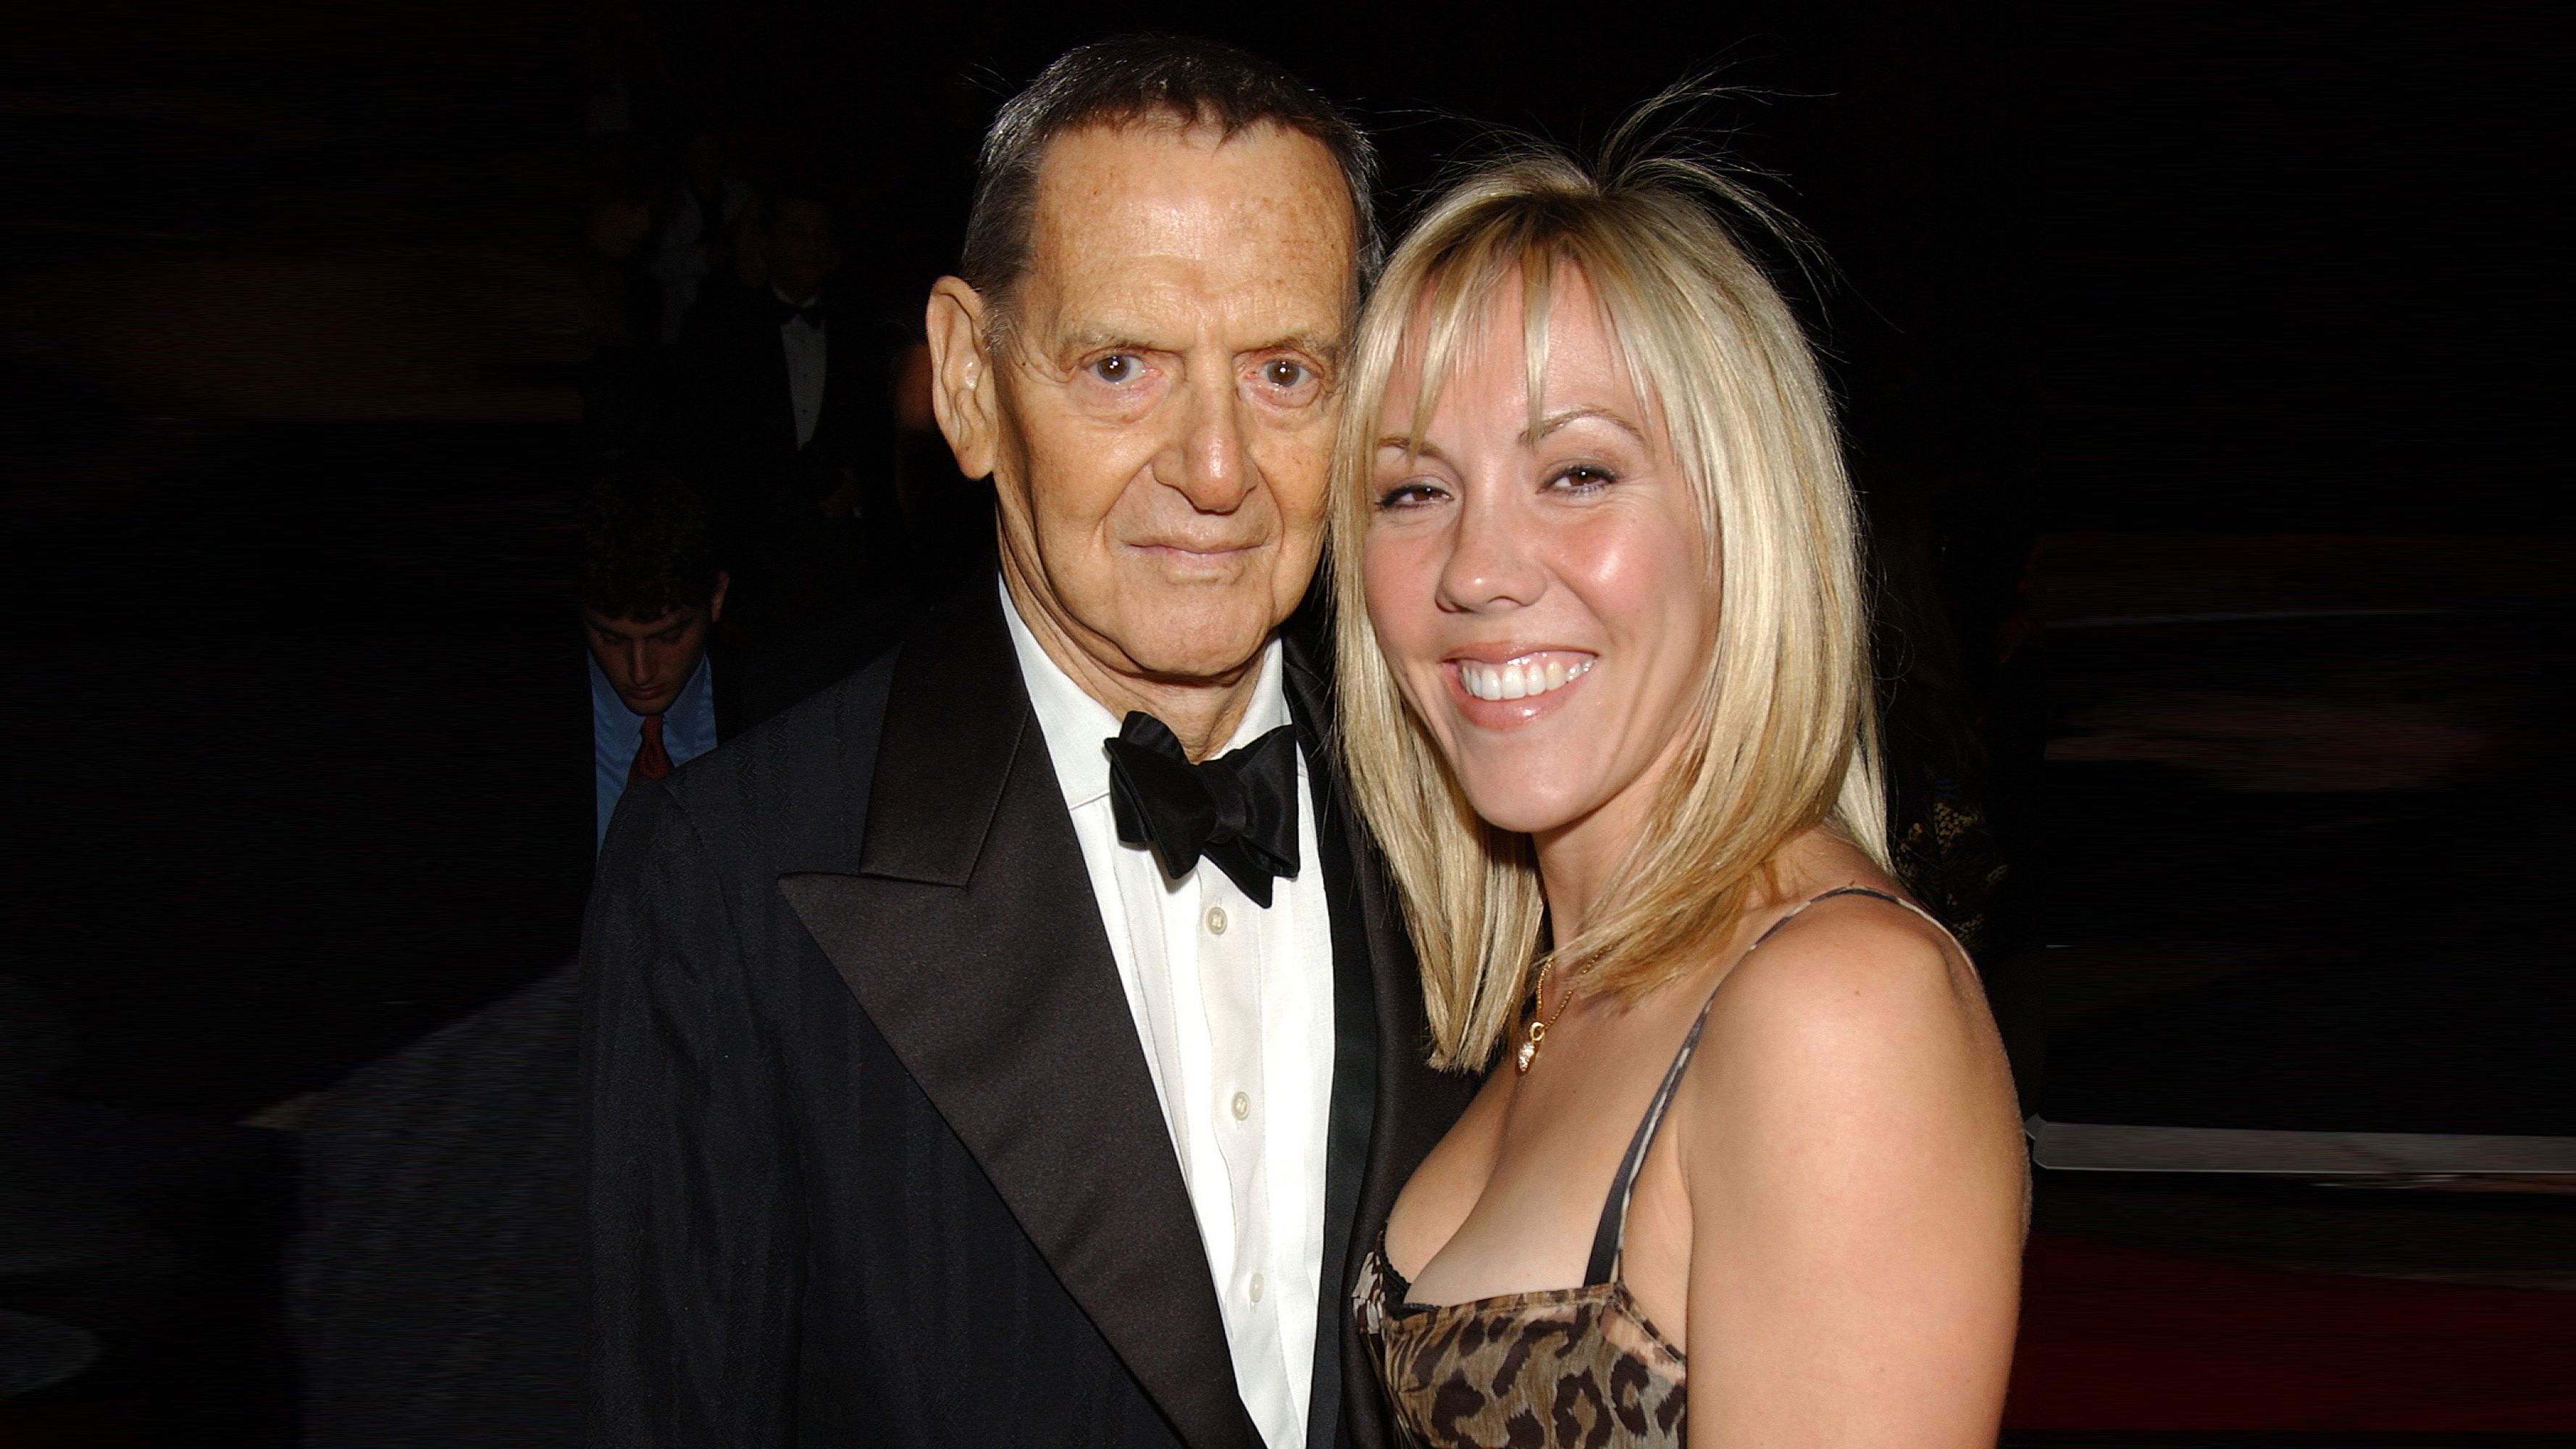 Heather Randall, Wife of Tony Randall The Marie Claire Interview Marie Claire pic